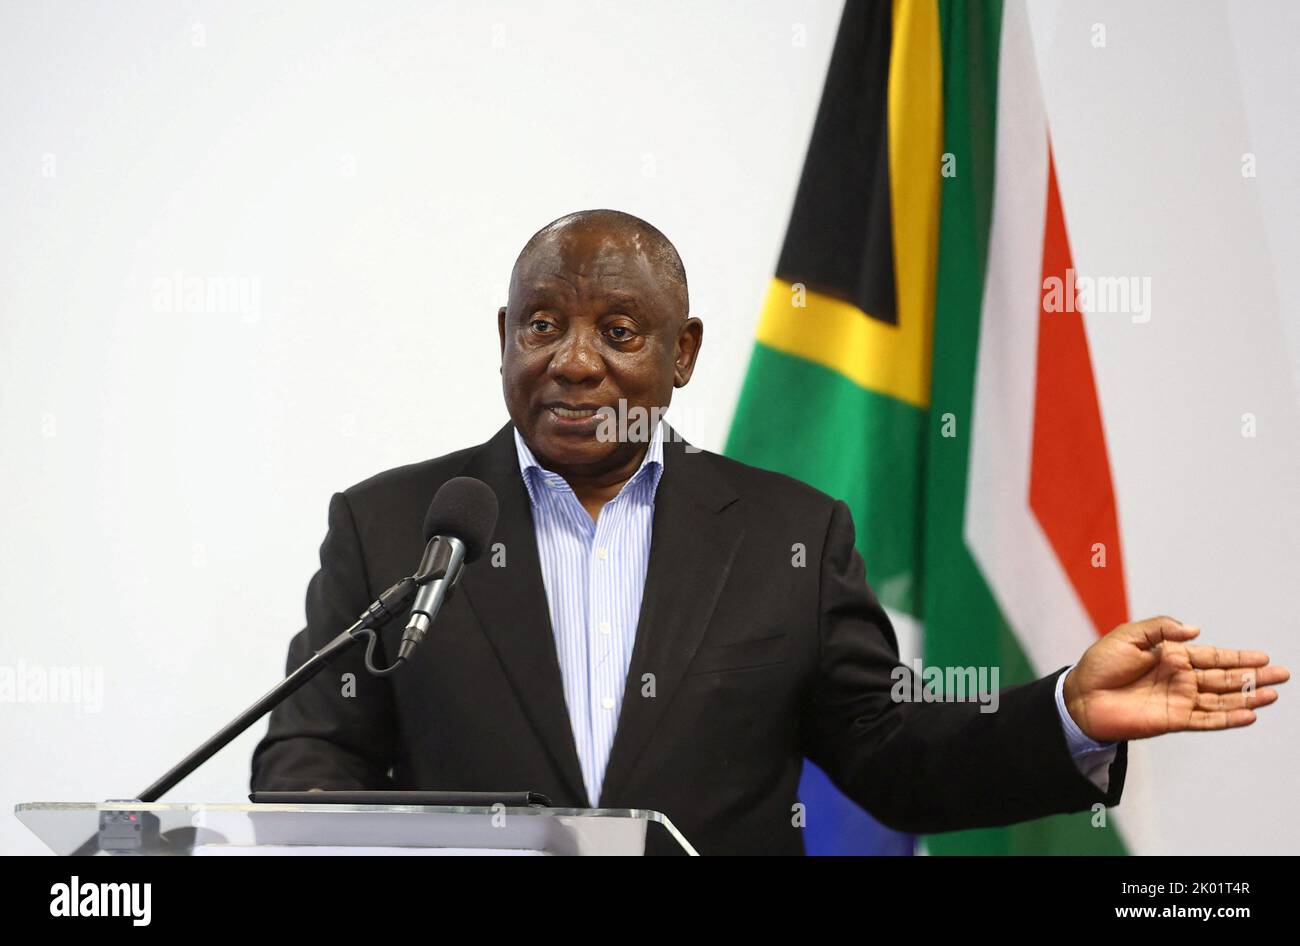 South Africa's President Cyril Ramaphosa speaks during the launch of the new Sandvik Khomanani manufacturing site, at Khomanani, in Kempton Park, Johannesburg, South Africa September 9, 2022. REUTERS/Siphiwe Sibeko Stock Photo